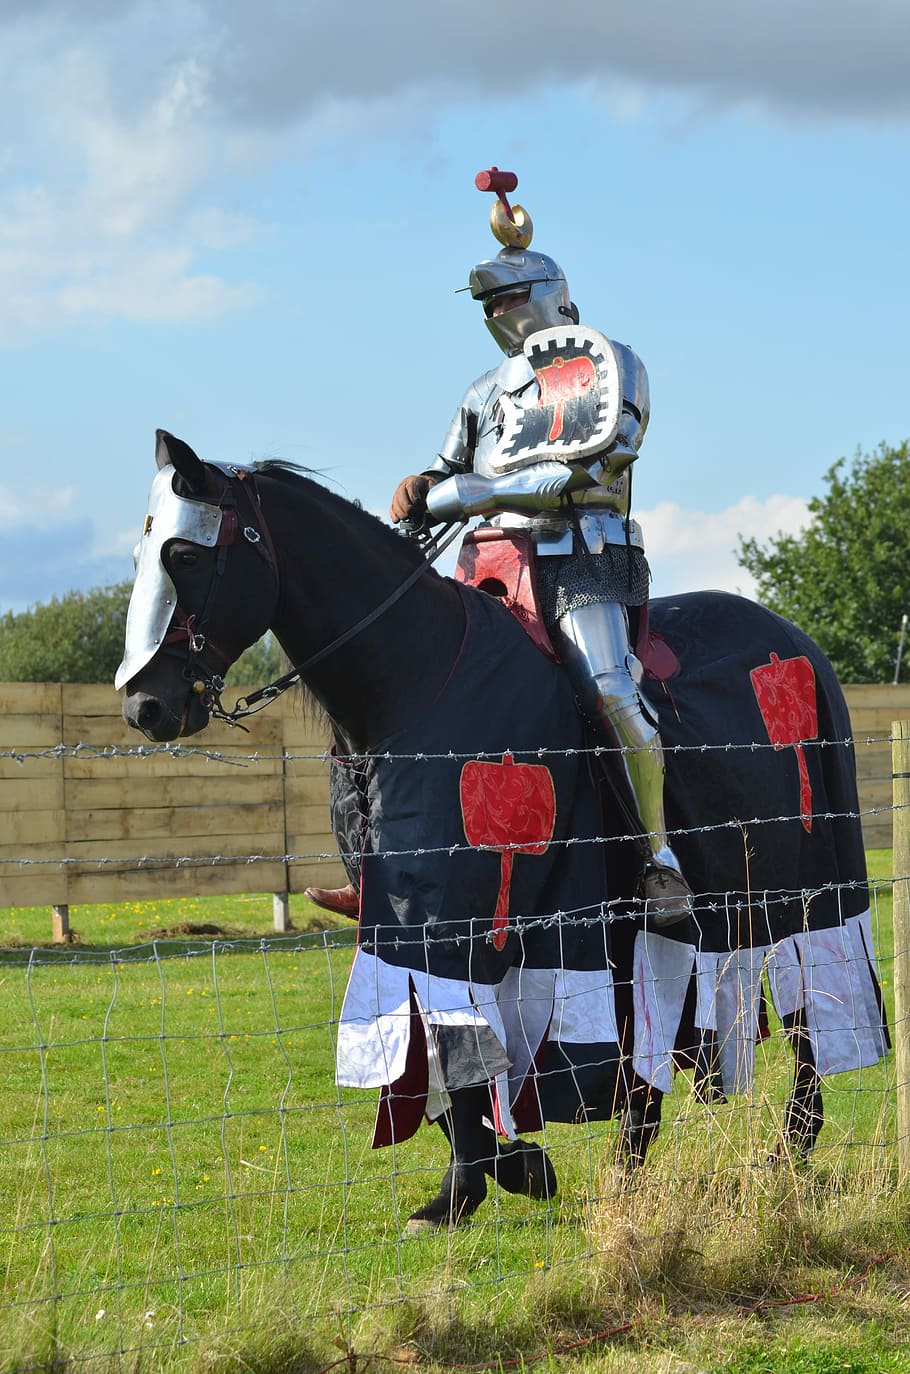 jousting, costume, armour, historic, knighthood, medieval, joust, rider, lance, mounted